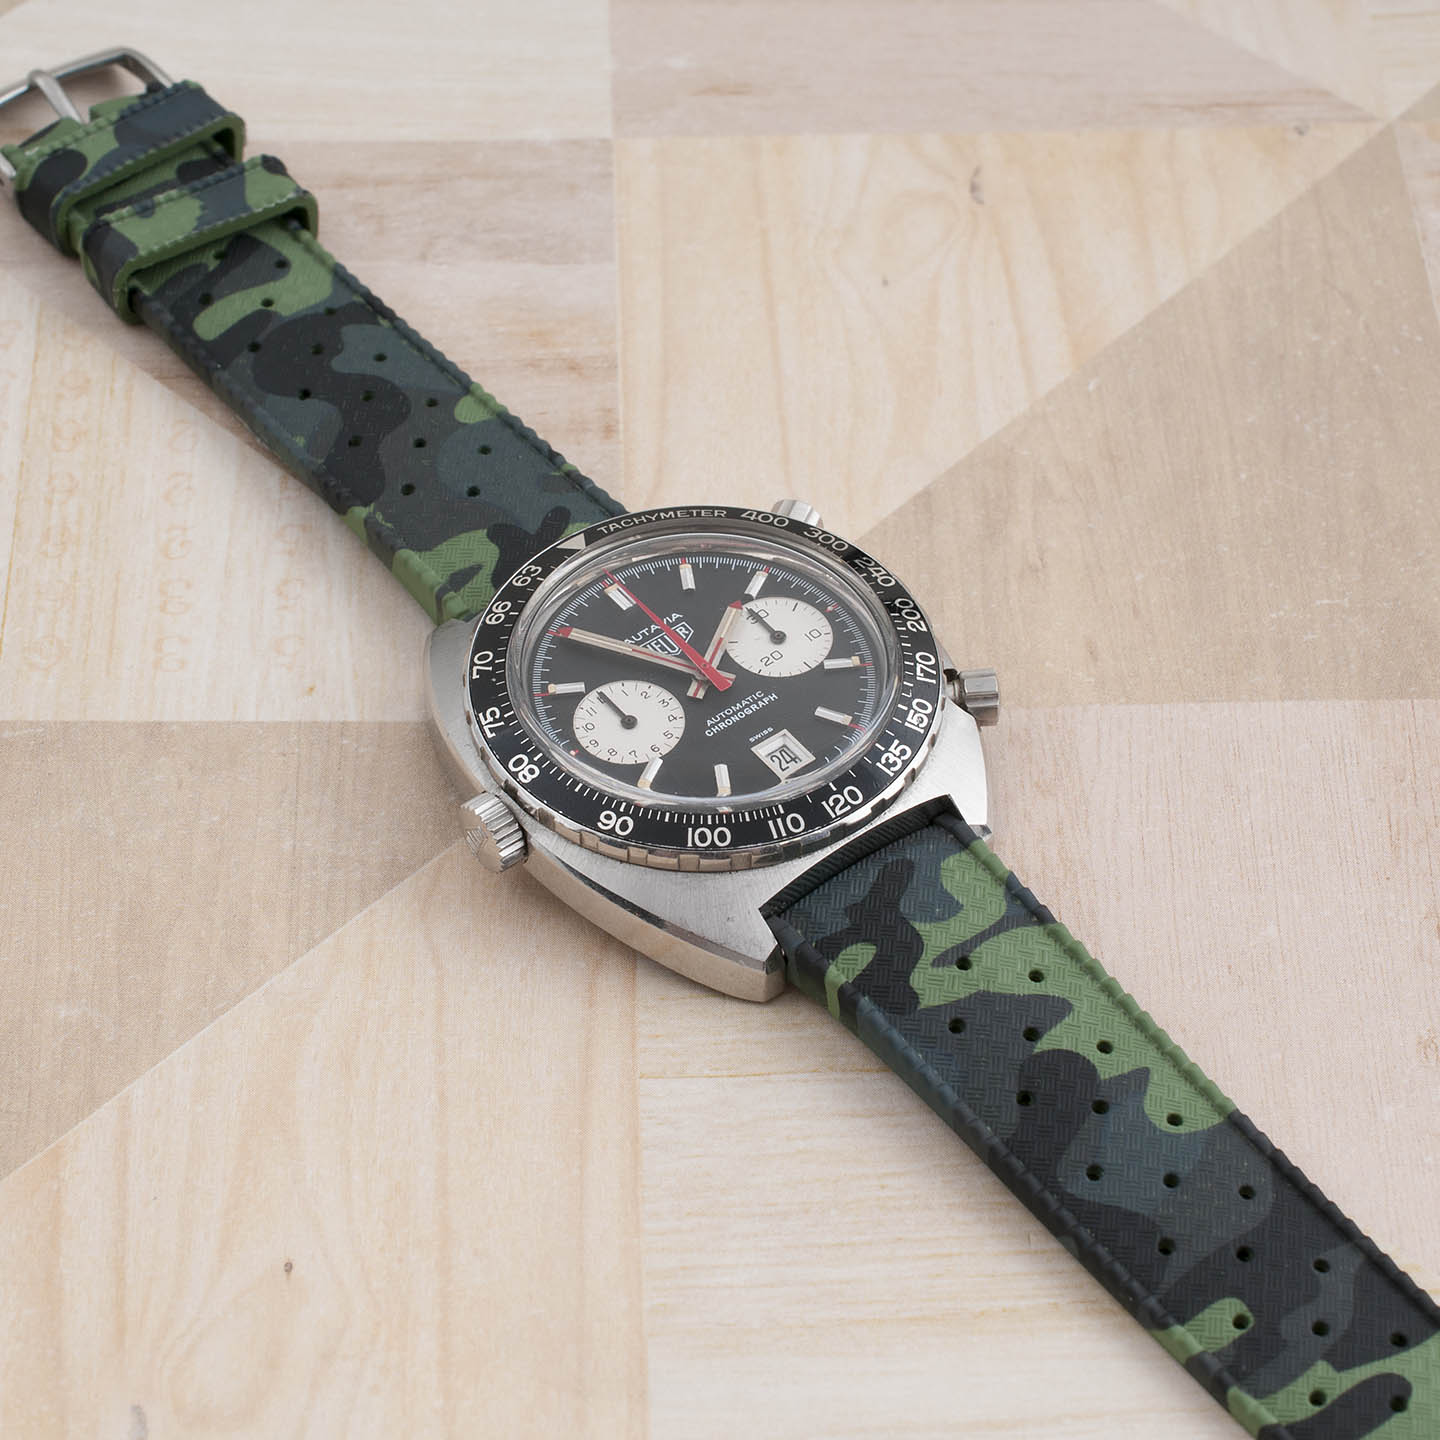 Tropical retro vintage replacement watch strap band FKM rubber tropic 19mm 20mm 21mm 22mm green camo camouflage heuer autavia viceroy